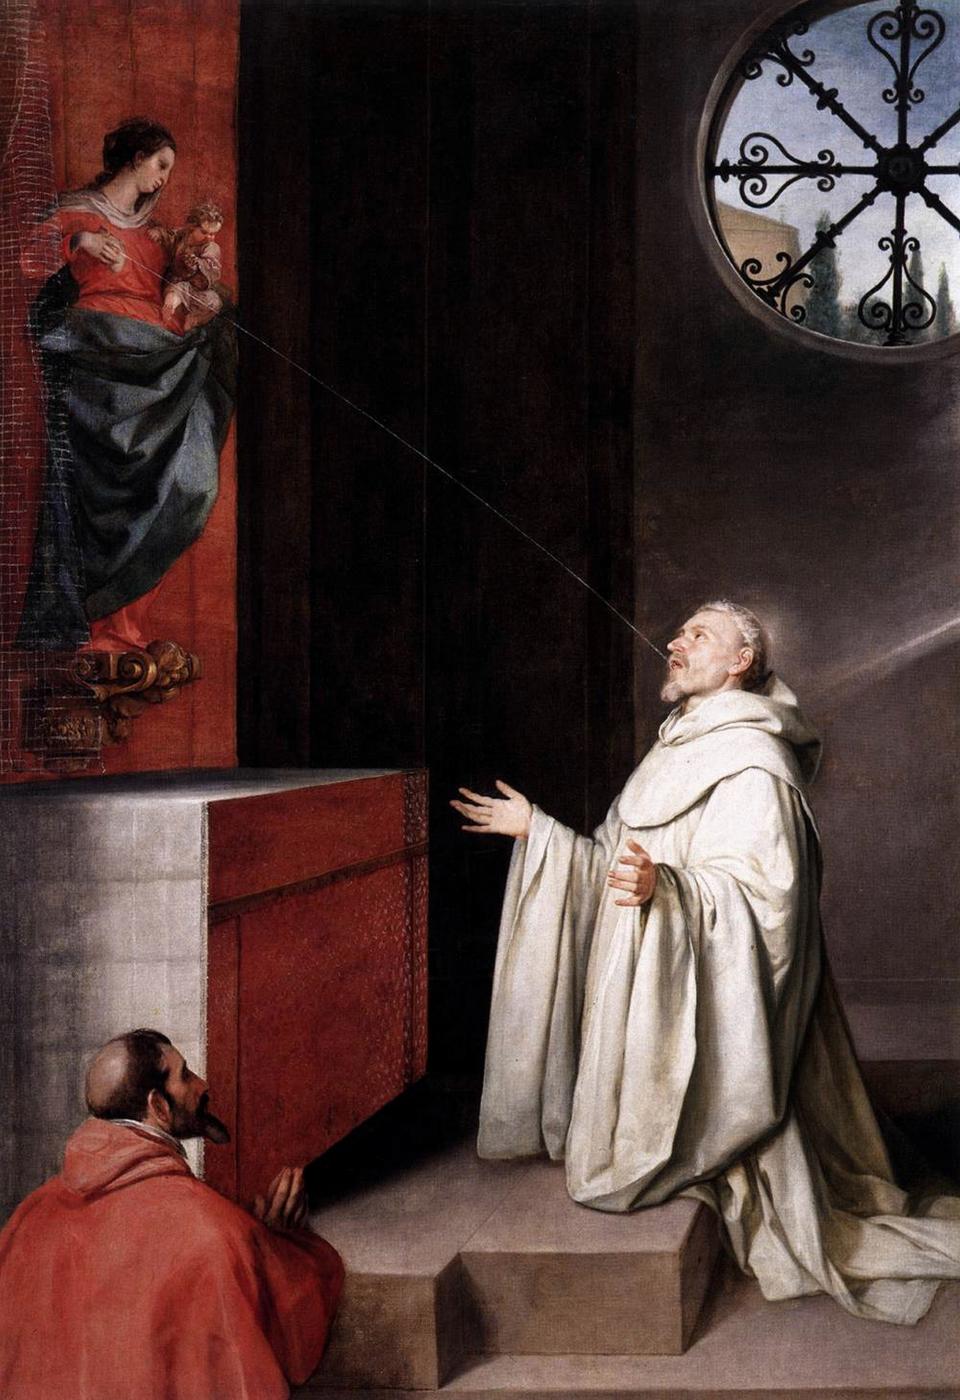 <em>The Lactation of St. Bernard</em>, c. 1650, by Alonzo Cano, is one interpretation of the “lactation miracle.” (Photo: Photo 12/UIG via Getty Images)